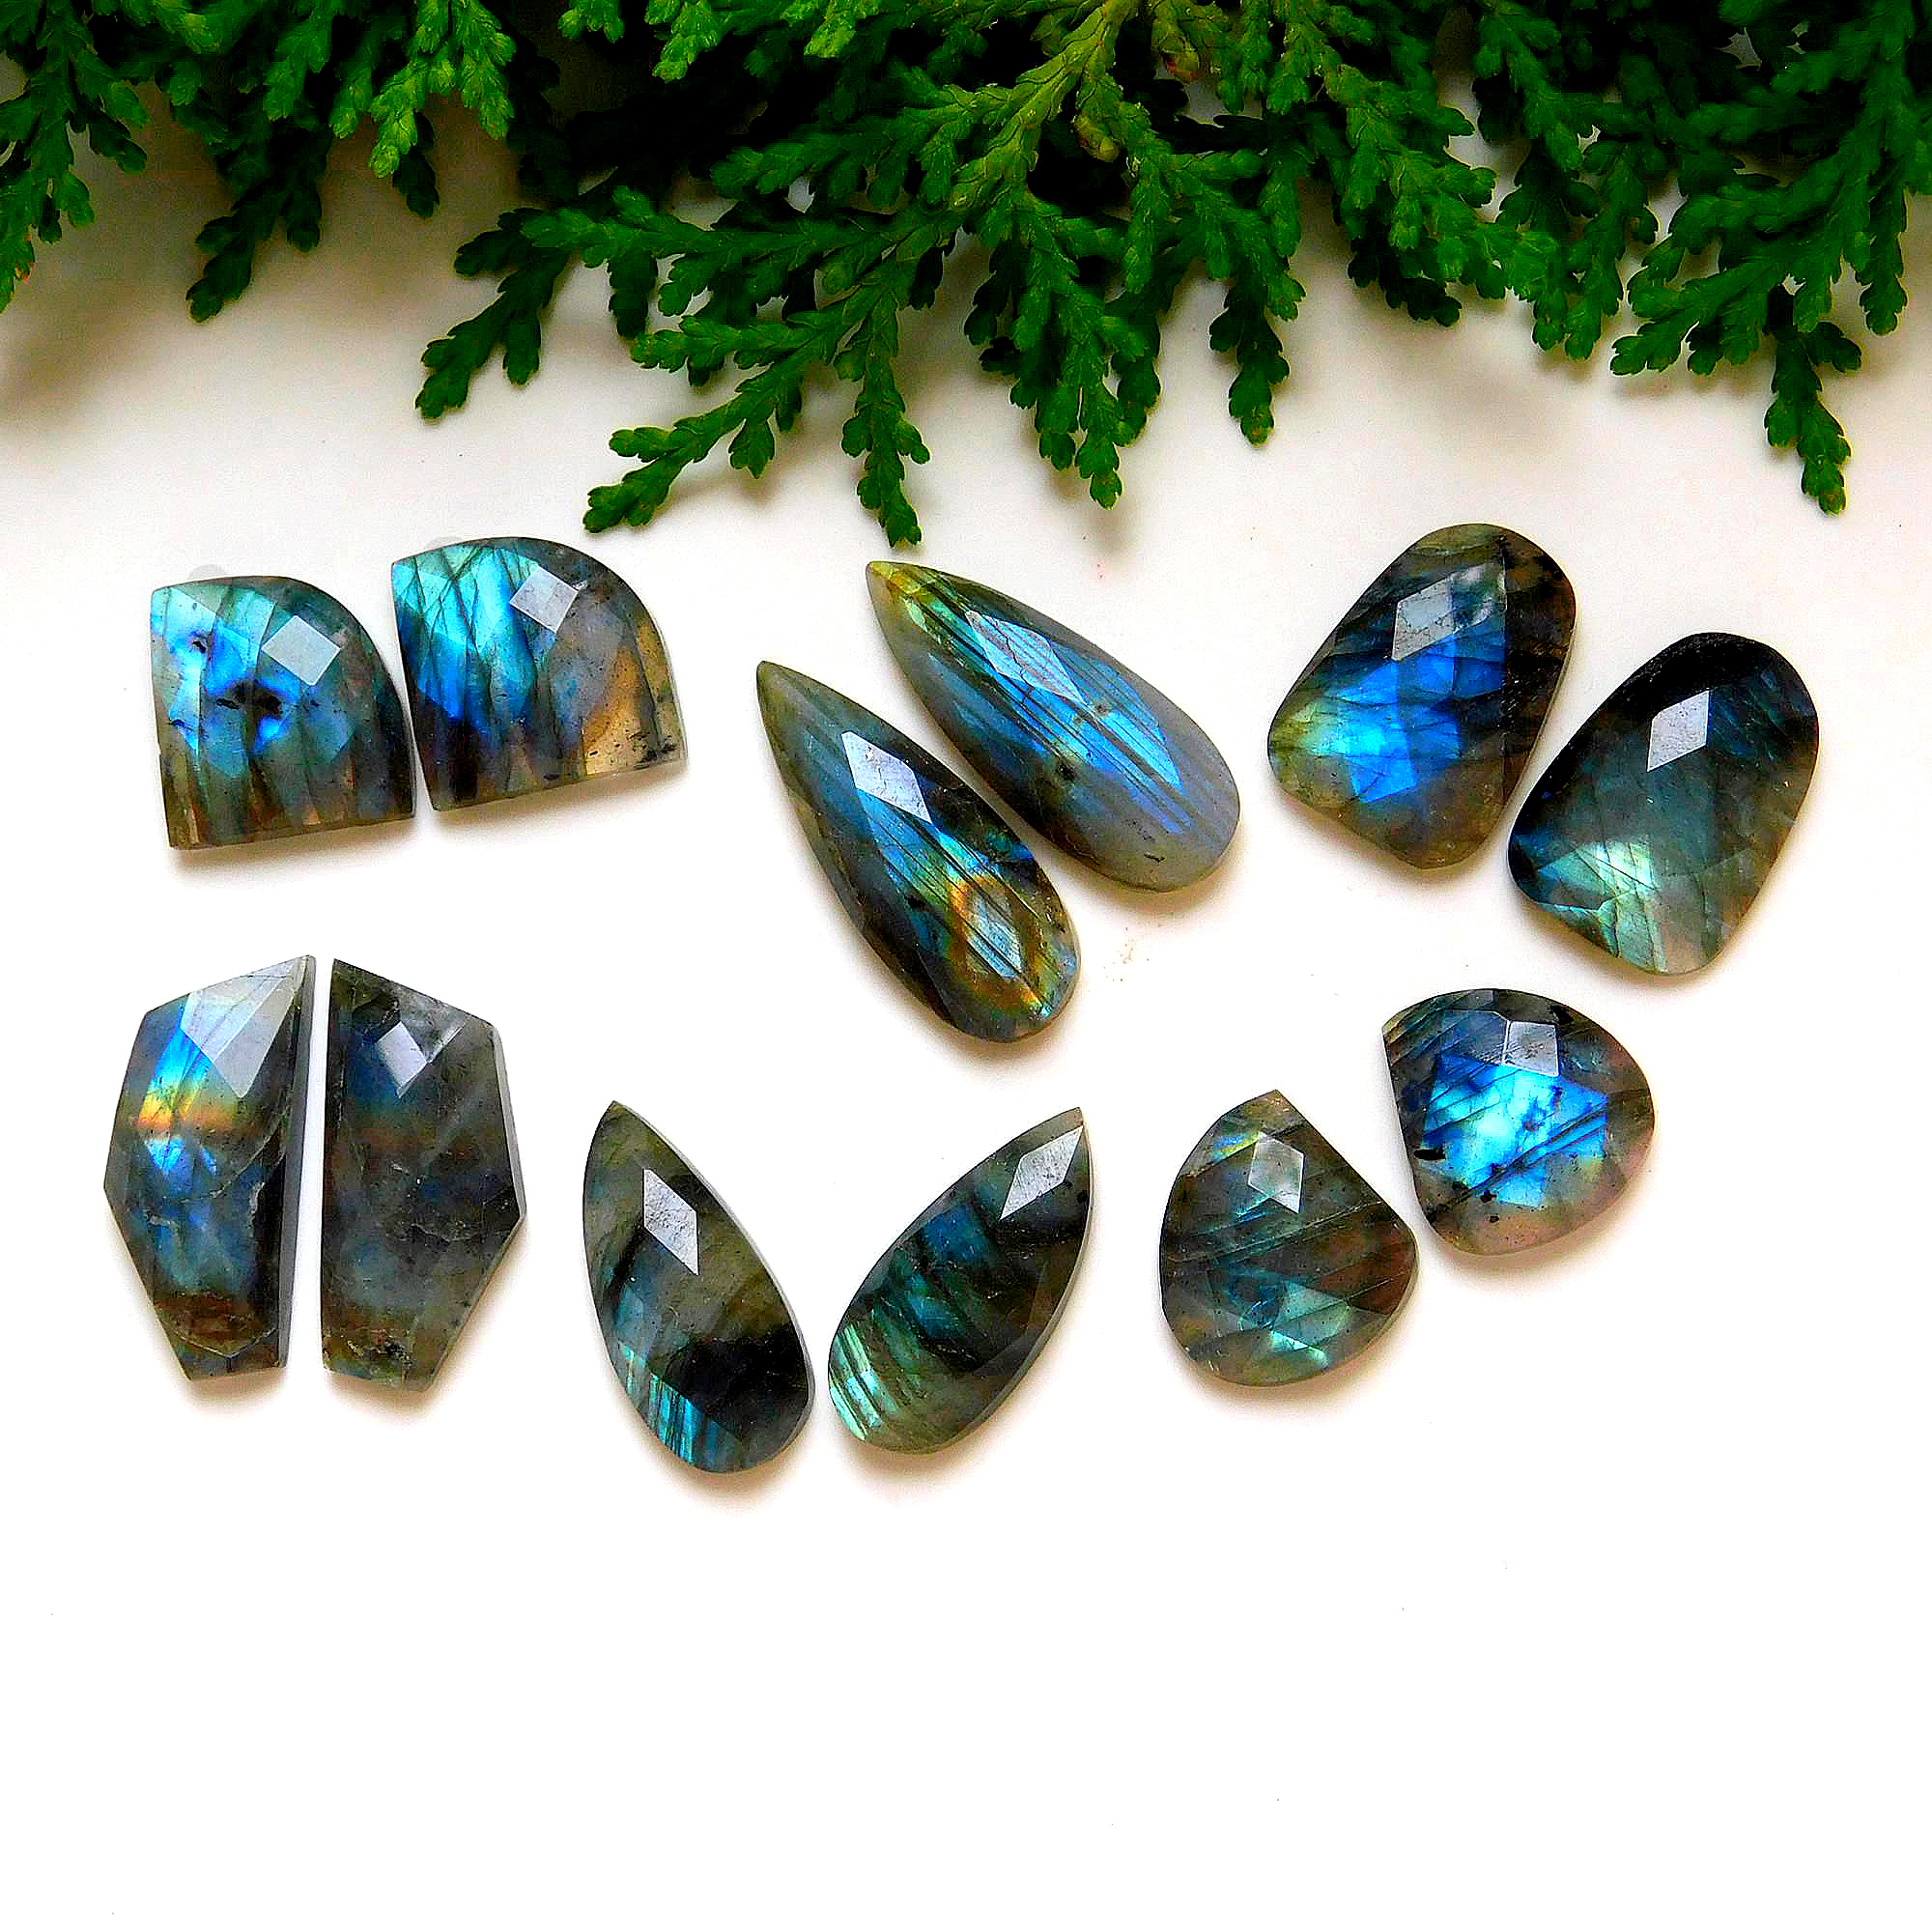 6 Pair 110 Cts Natural Faceted Labradorite Mix pair Cabochons Loose Gemstone Wholesale Lot Size 25x10 15x14 mm